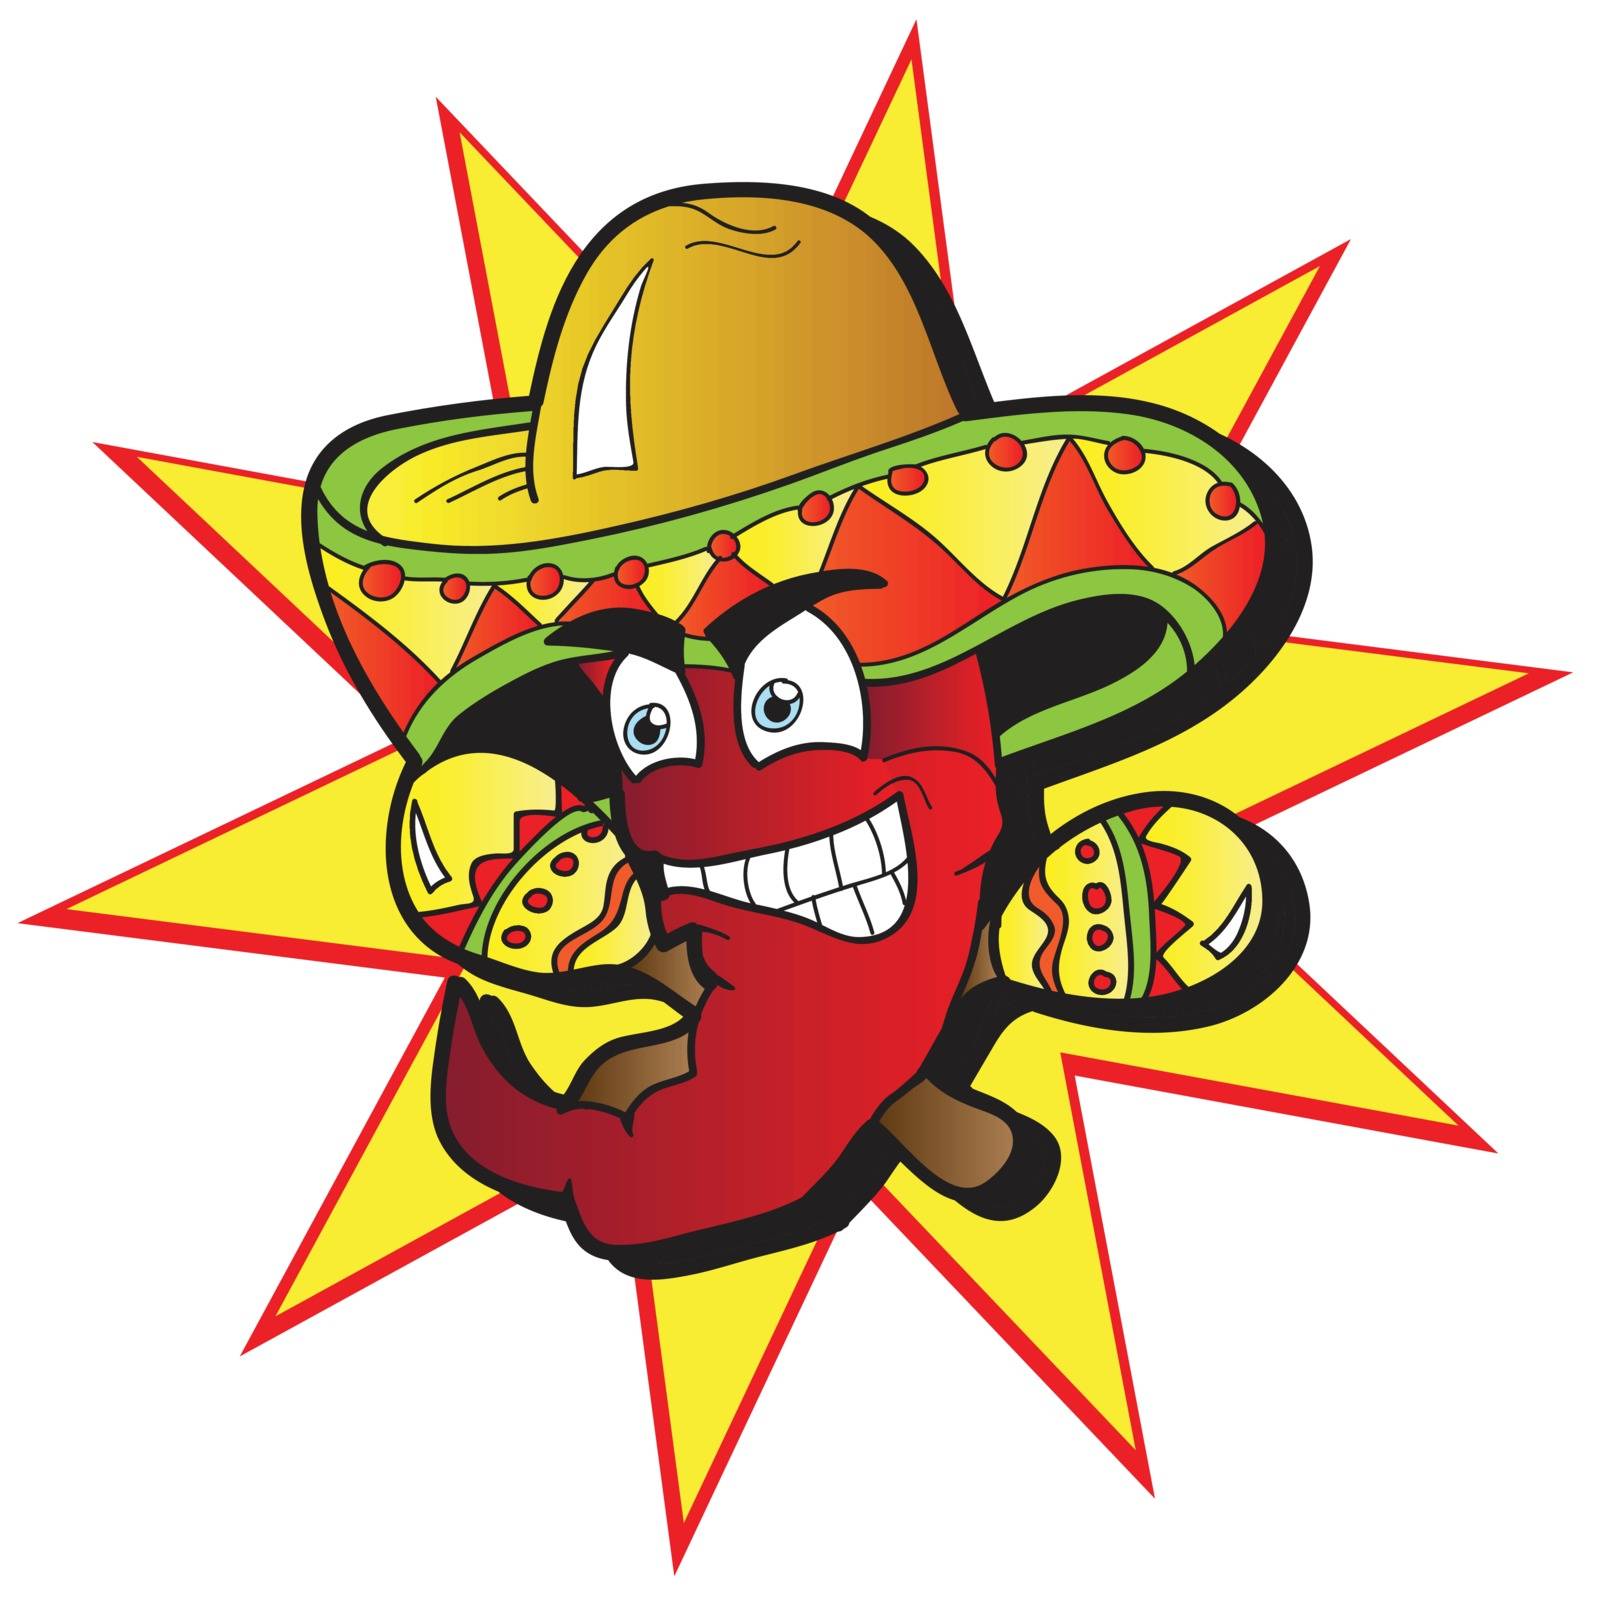 Chili Character with a Pair of Maracas by natali_brill